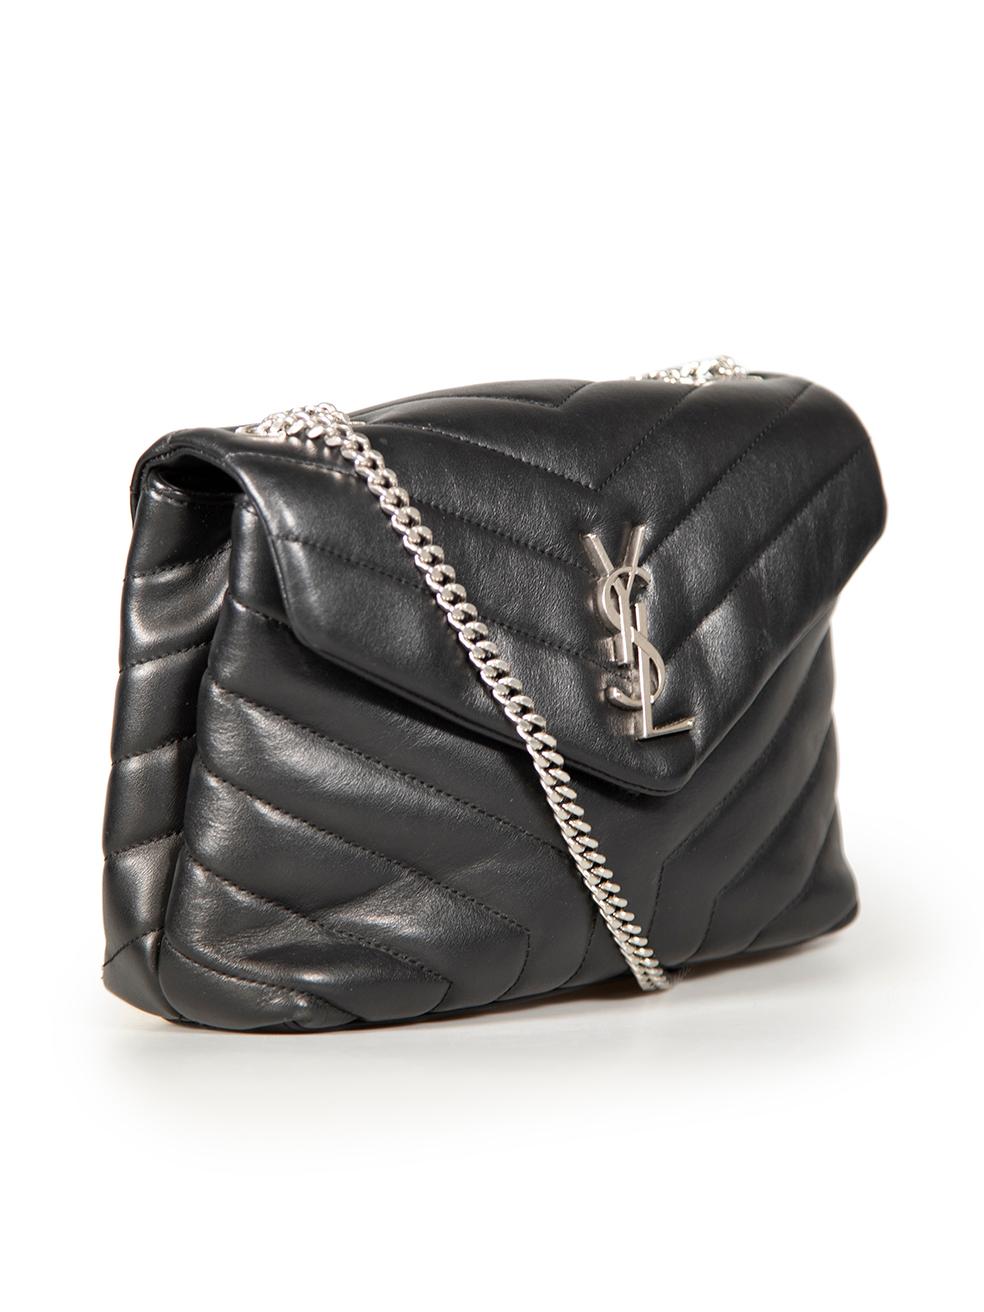 CONDITION is Very good. Minimal wear to bag is evident. Minimal wear to the front with very light abrasions to the leather and marks to the lining on this used Saint Laurent designer resale item. This item comes with original dust bag.
 
 Details
